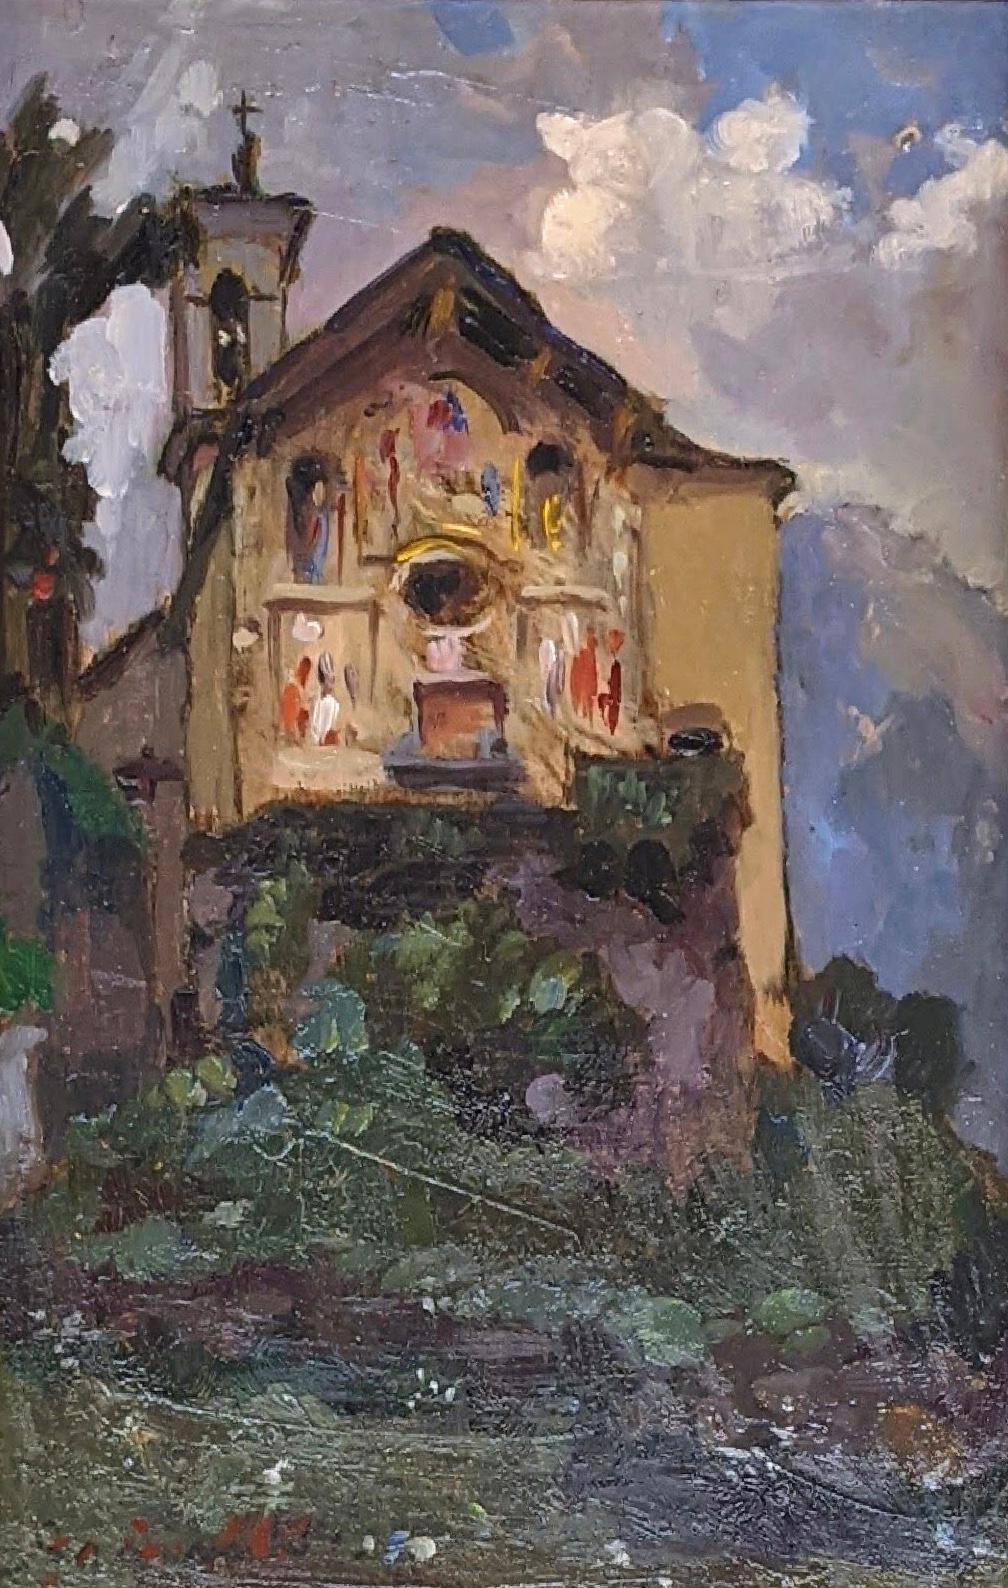 Mountain landscape with church, oil on canvas in bright colors.
Golden frame.